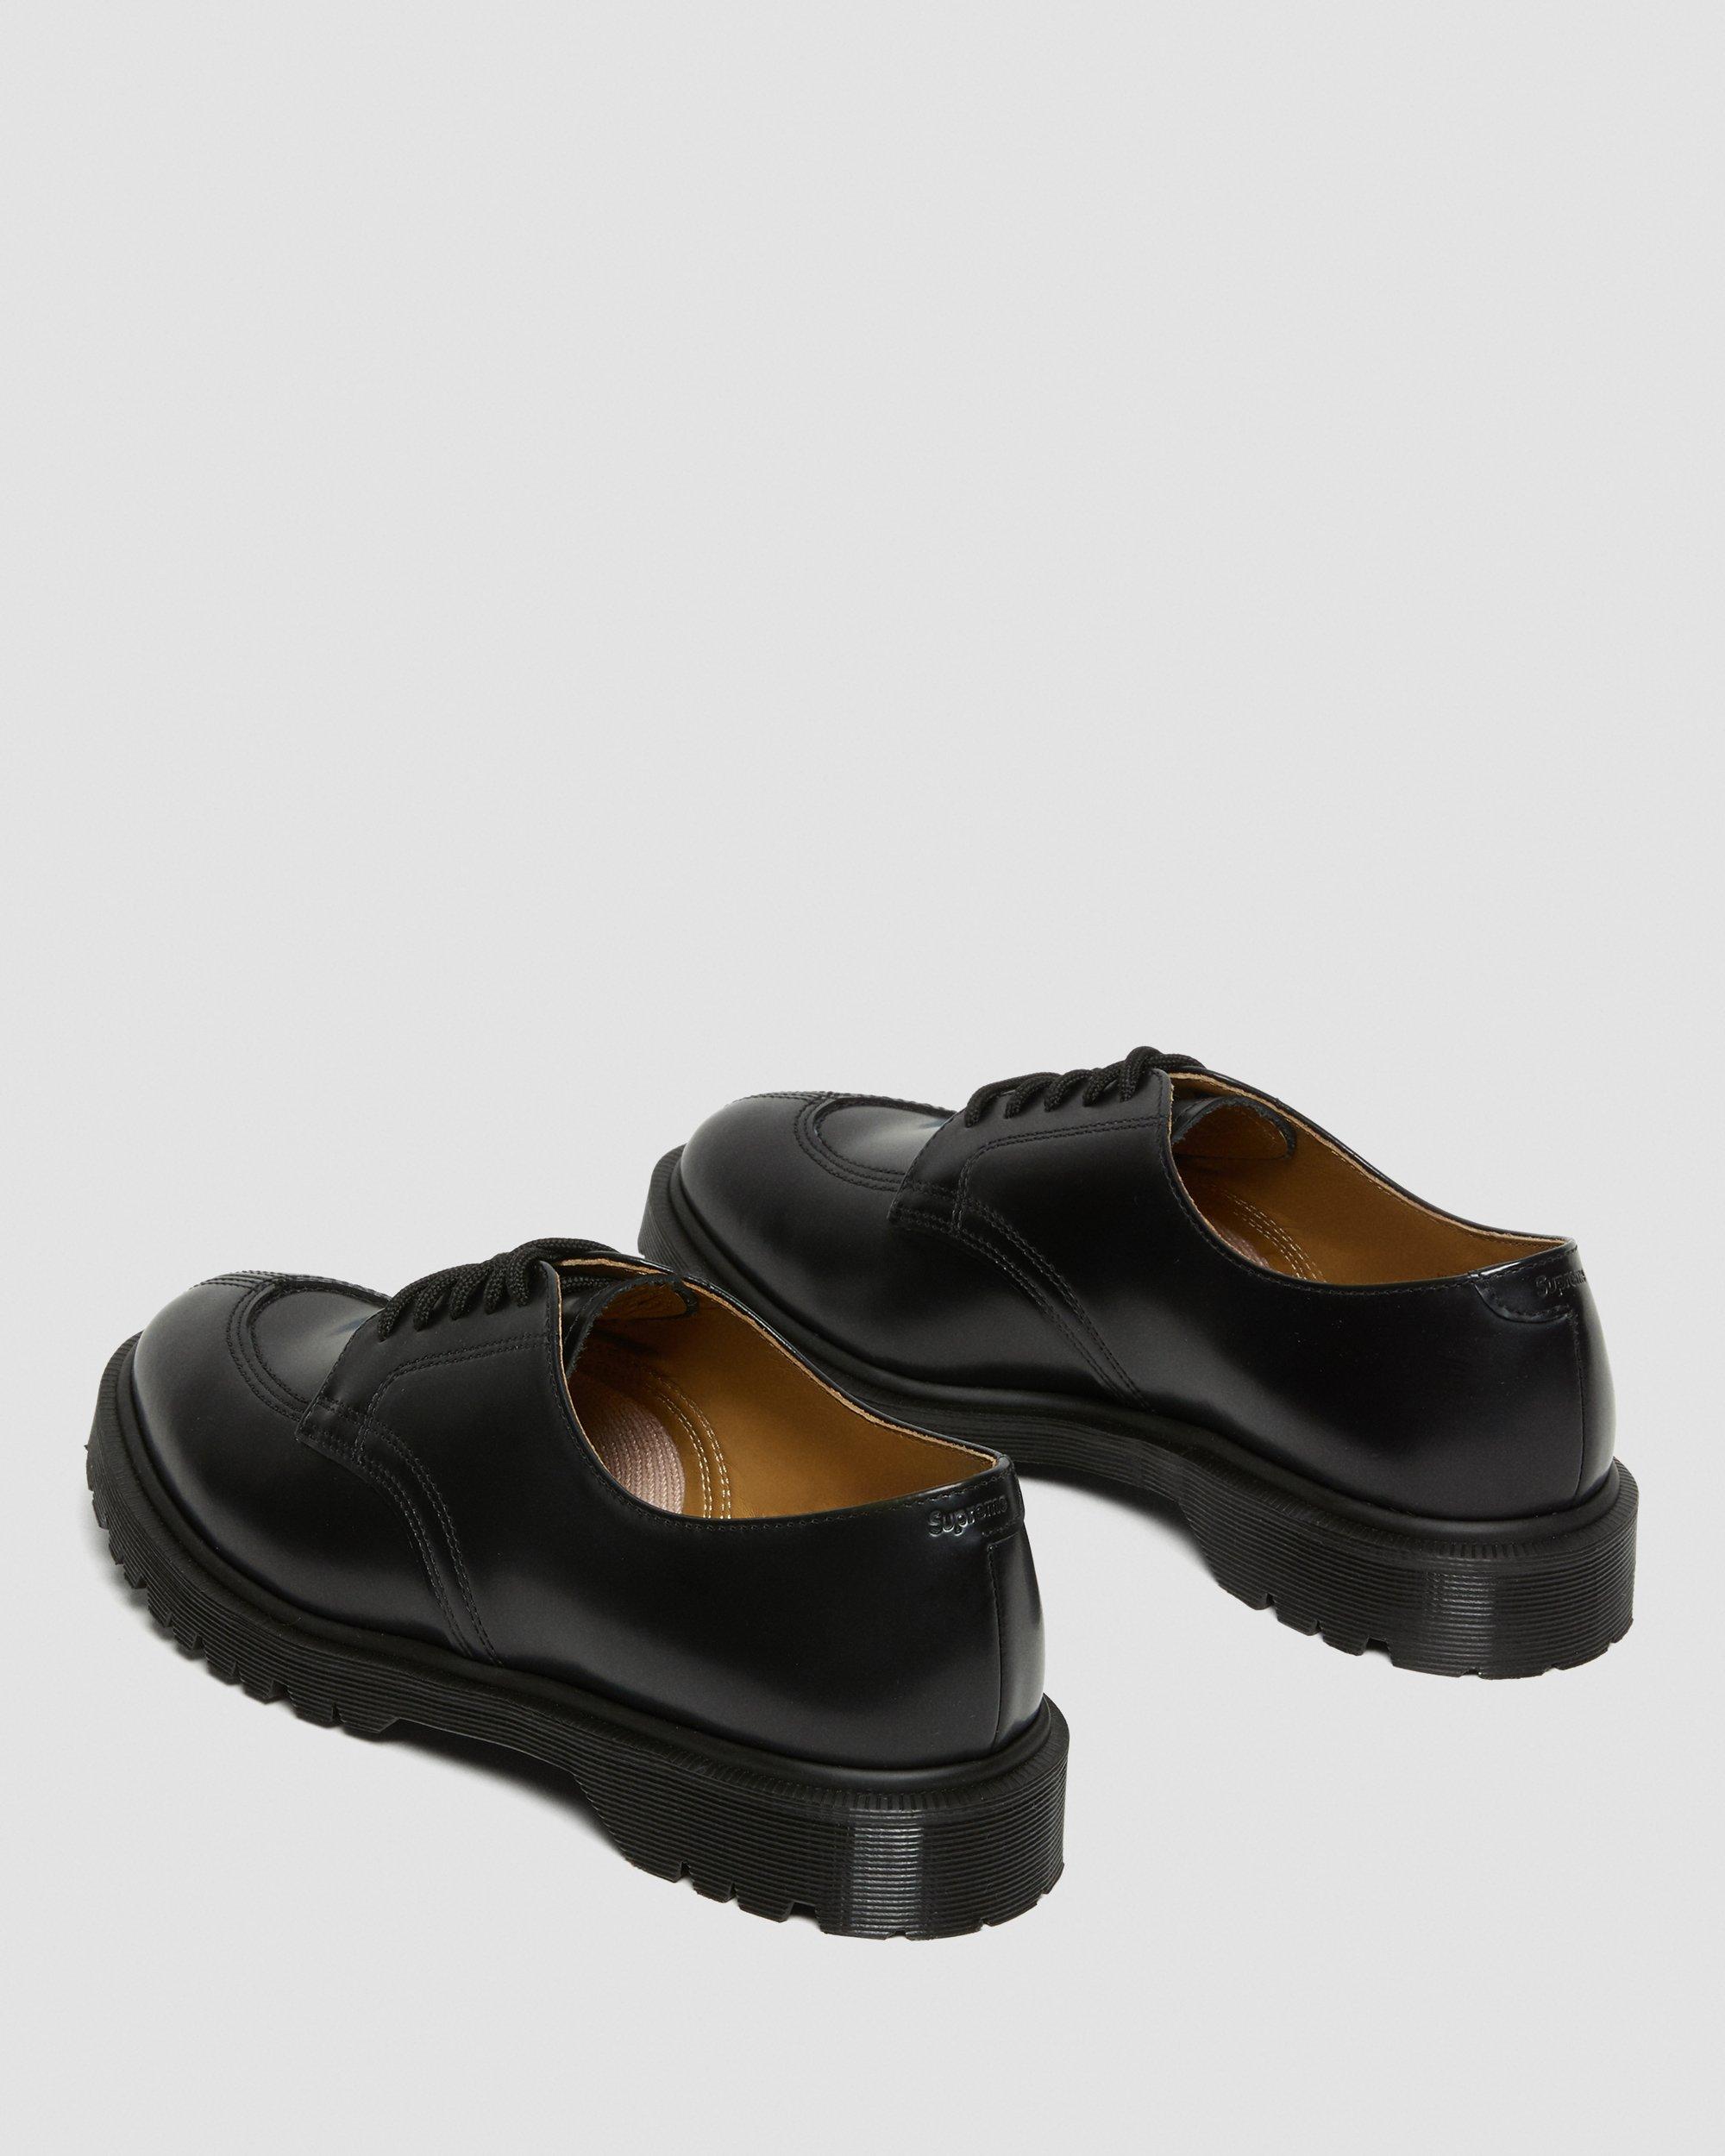 https://i1.adis.ws/i/drmartens/27150001.88.jpg?$large$Supreme® 2046 Smooth Leather Oxford Shoes Dr. Martens